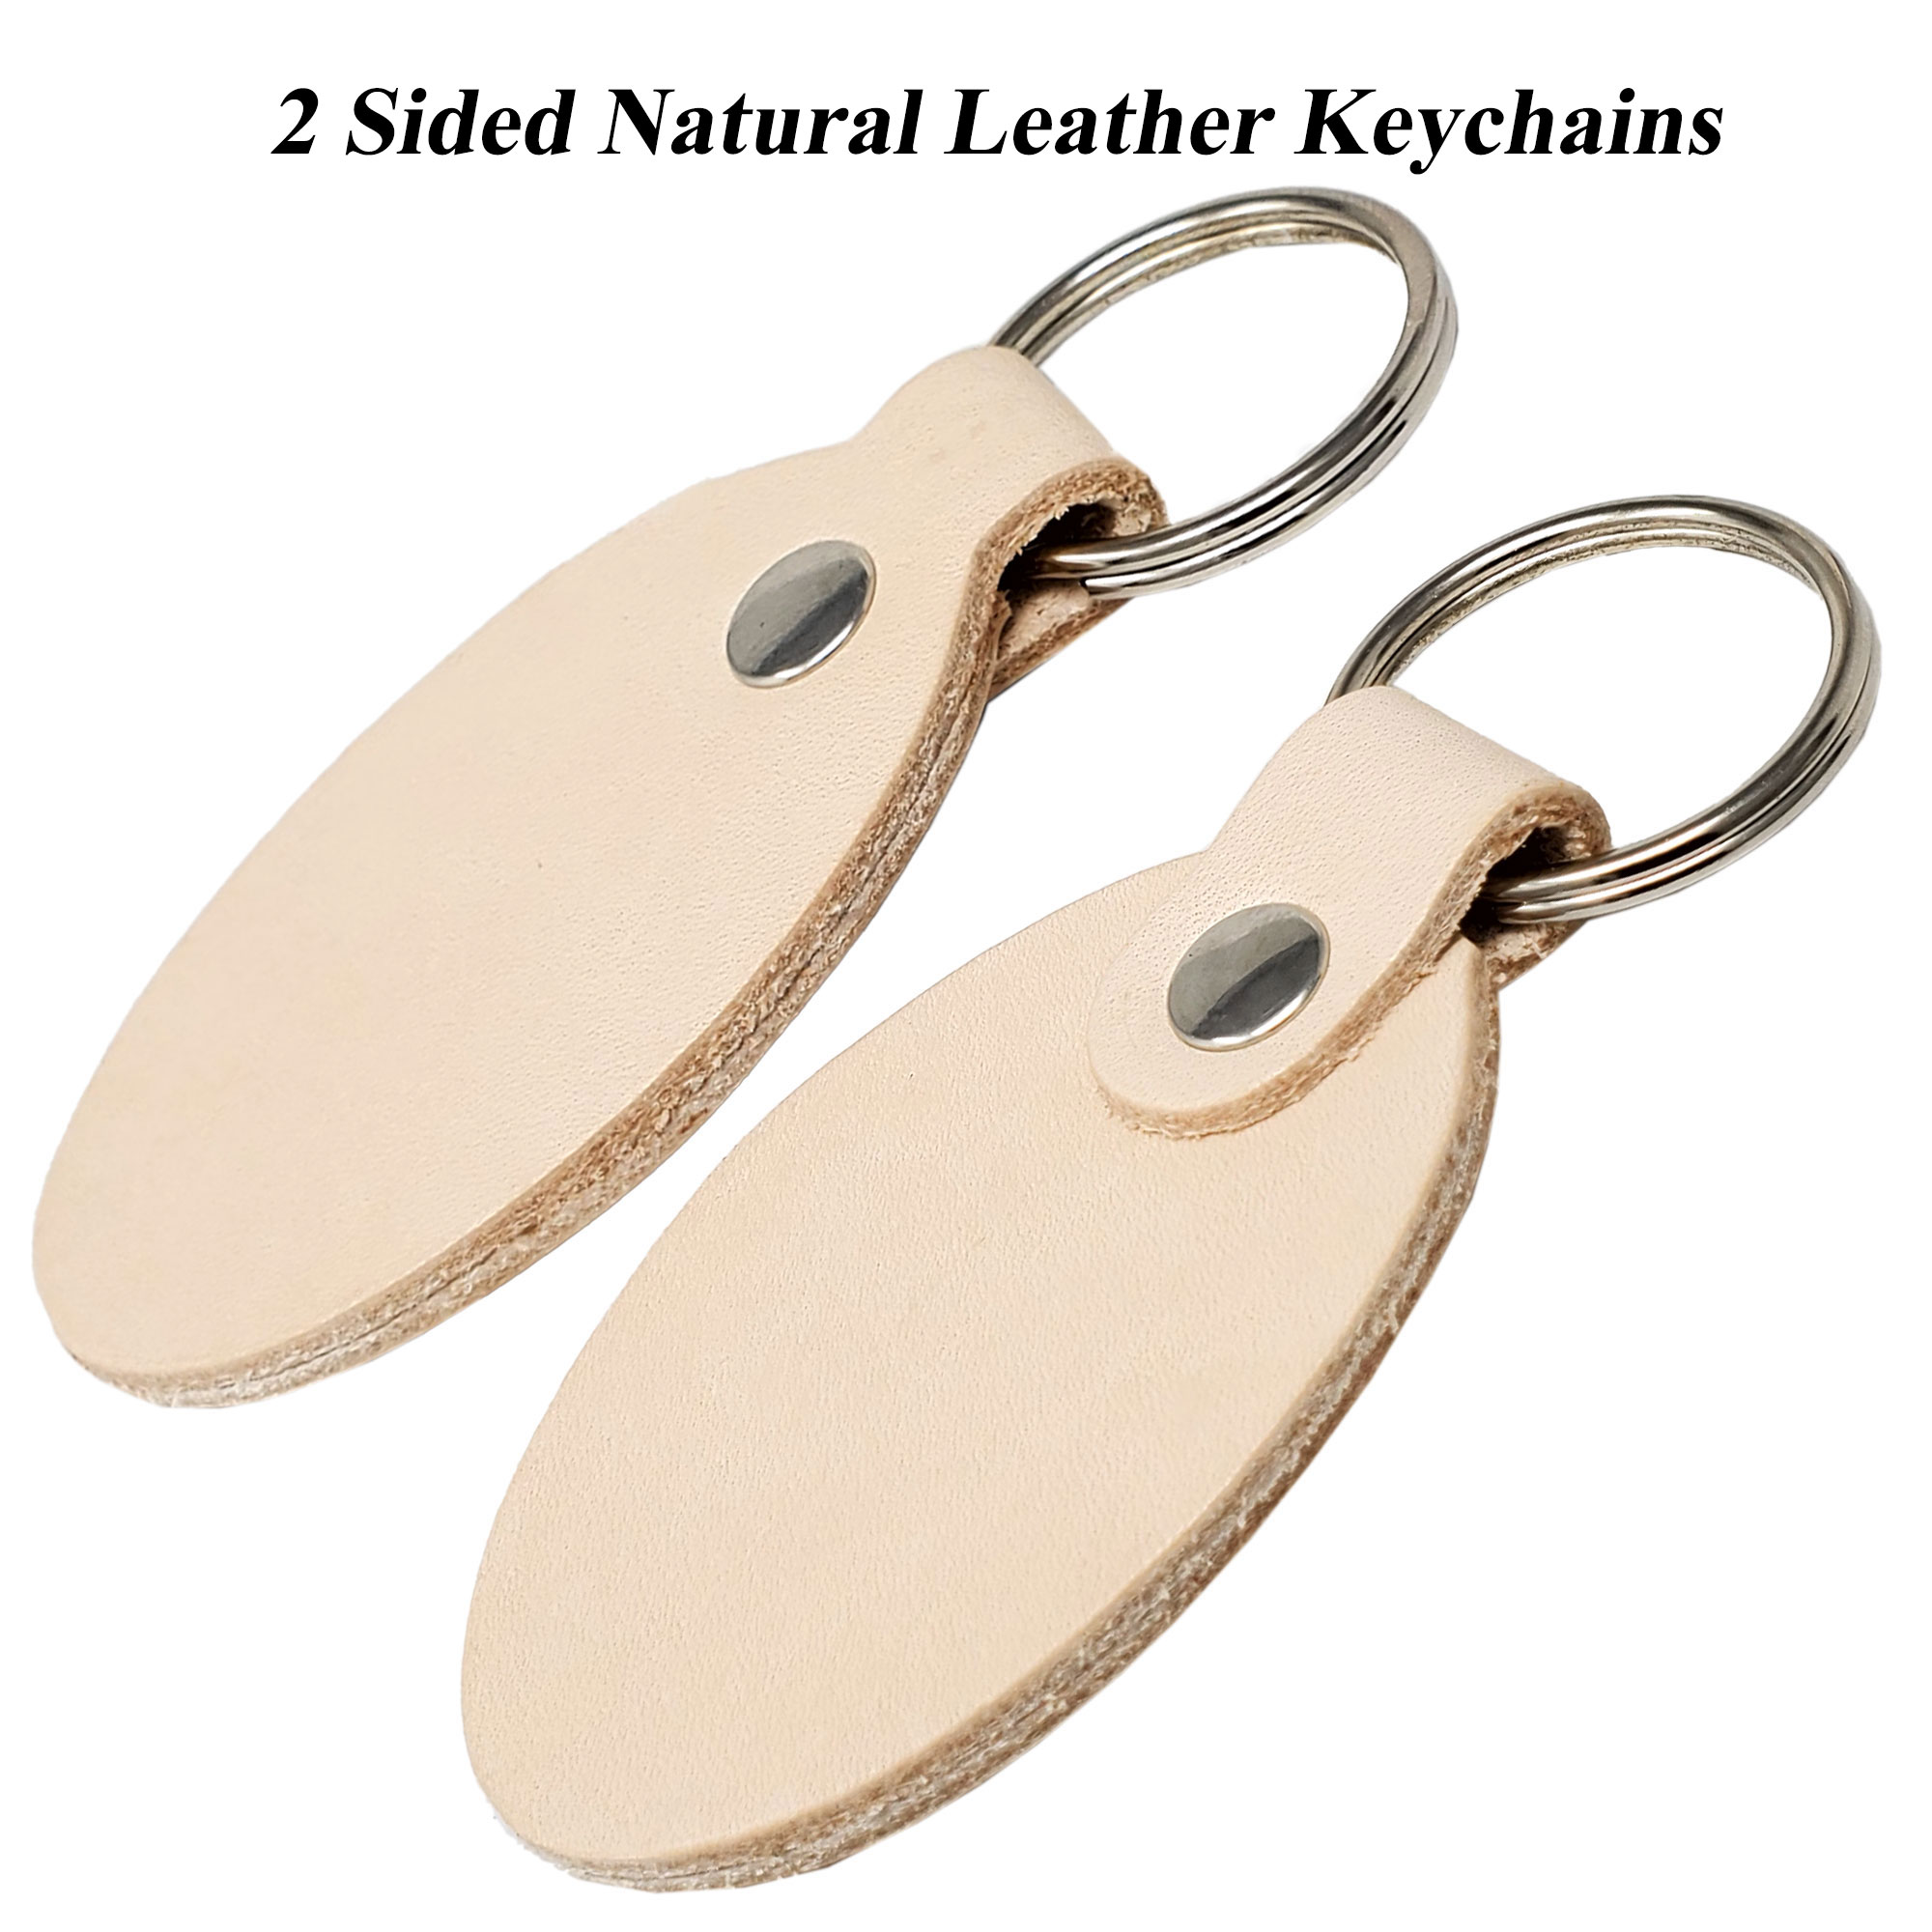 2 Sided Natural Leather Keychains -10 Packs Keyrings